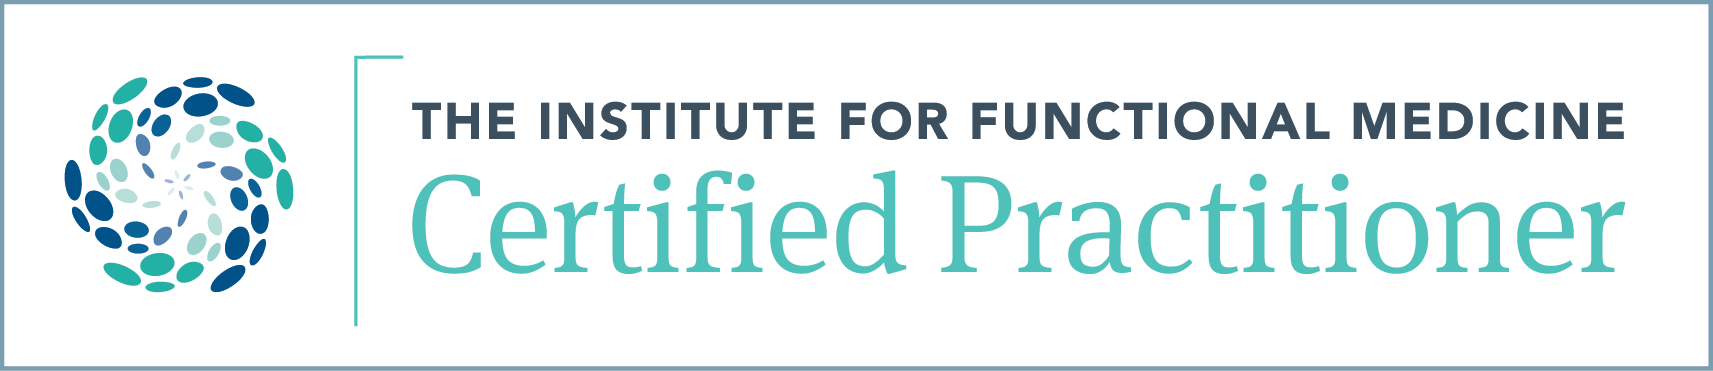 The Institute For Functional Medicine Certified Practitioner